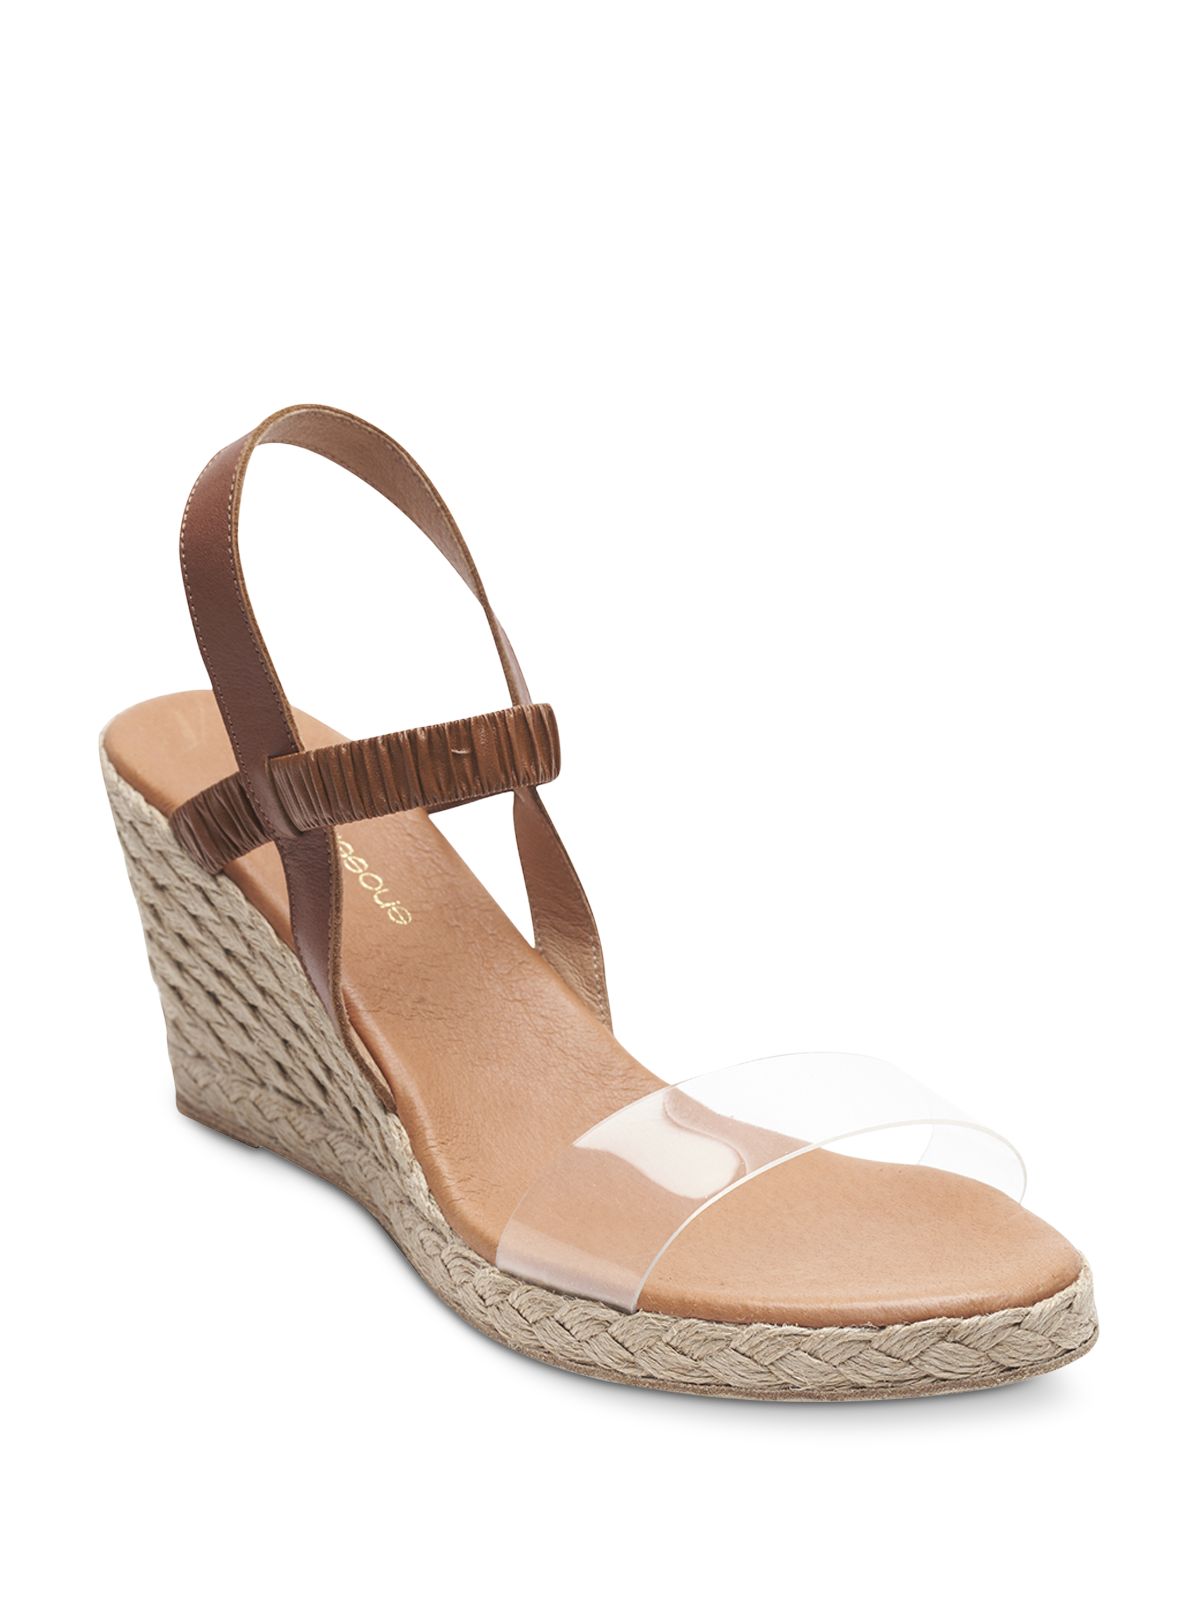 ANDRE ASSOUS Womens Beige Cushioned Transparent Strap Woven Stretch Alberta Round Toe Wedge Slip On Leather Slingback Sandal 38